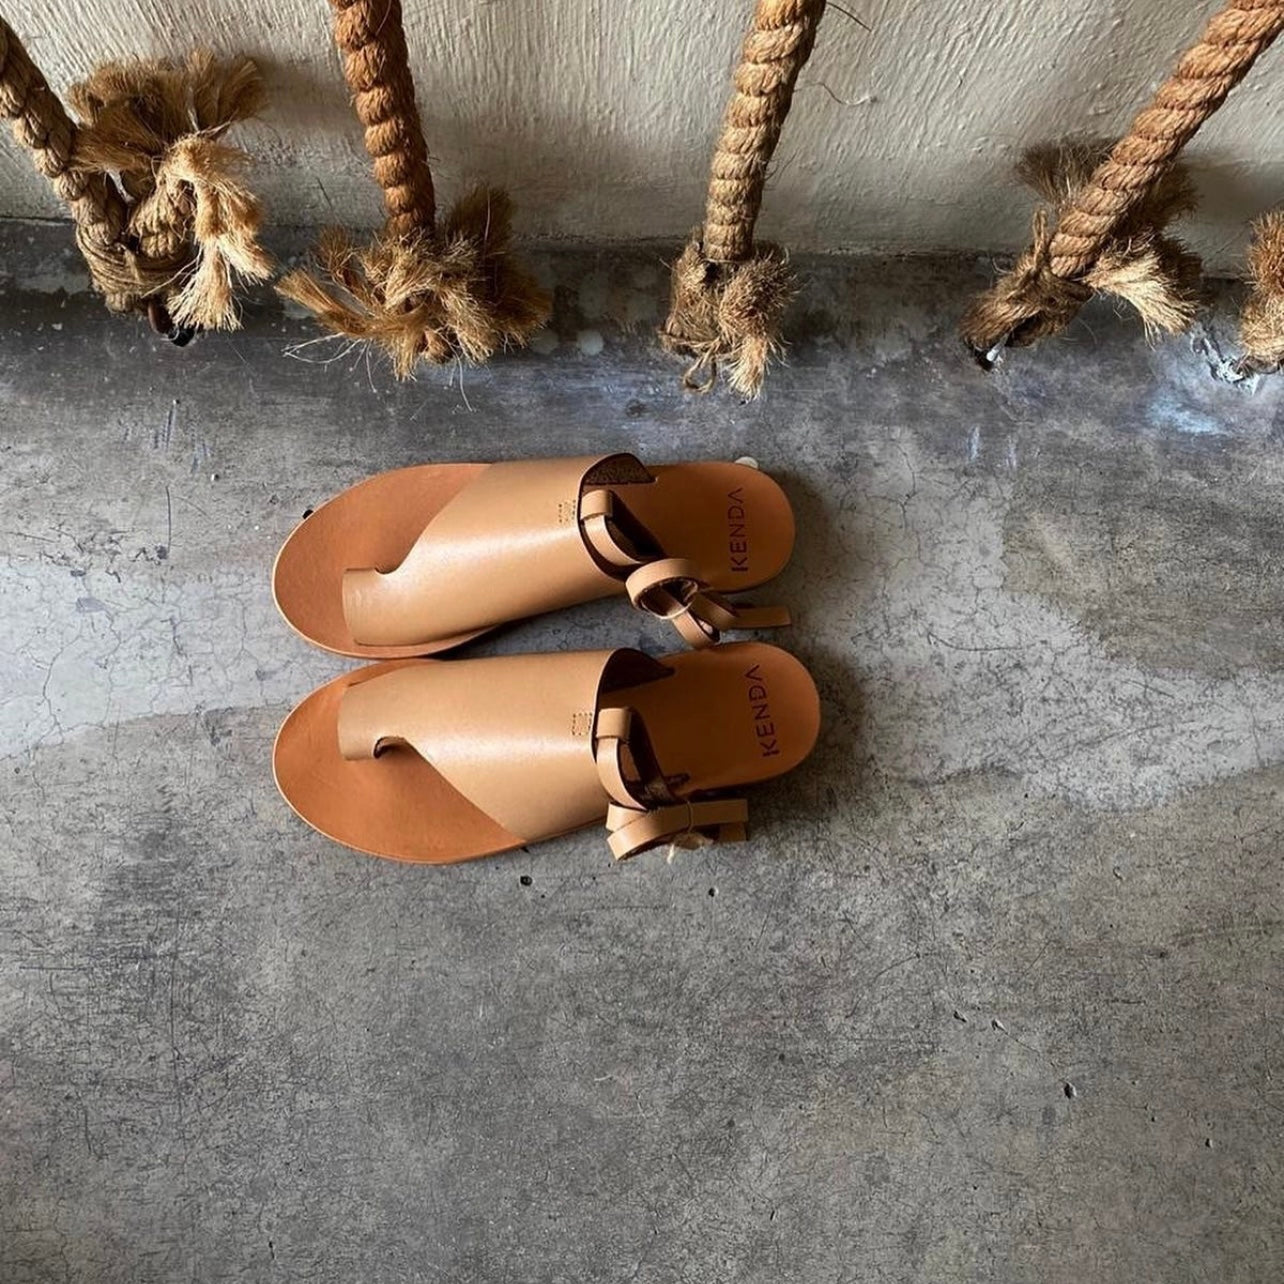 Leather suede sandals in nude with an ankle tie.